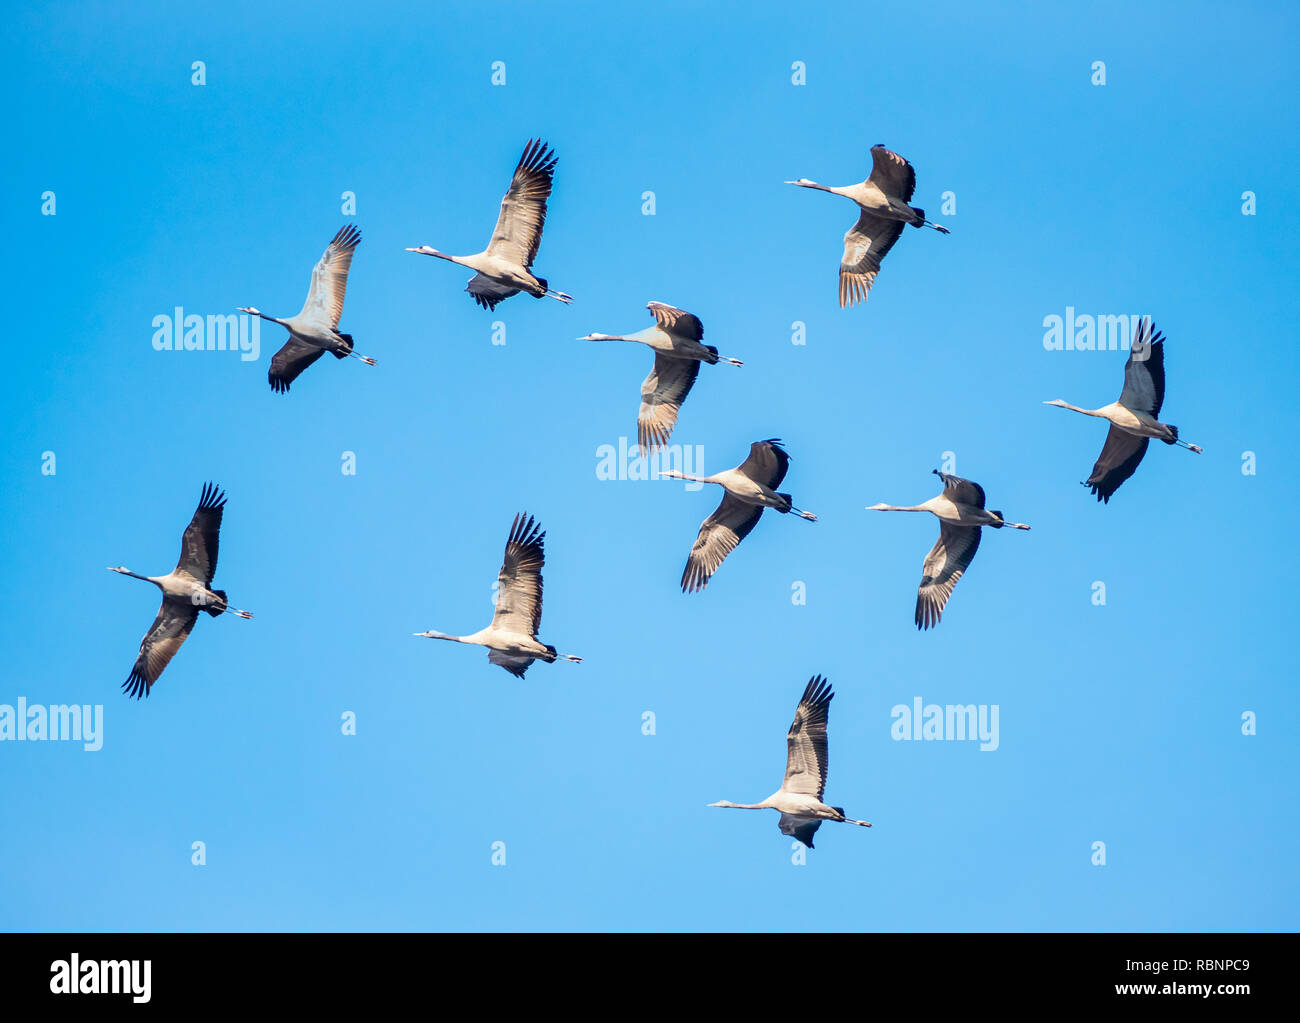 group of cranes flying in blue sky Stock Photo